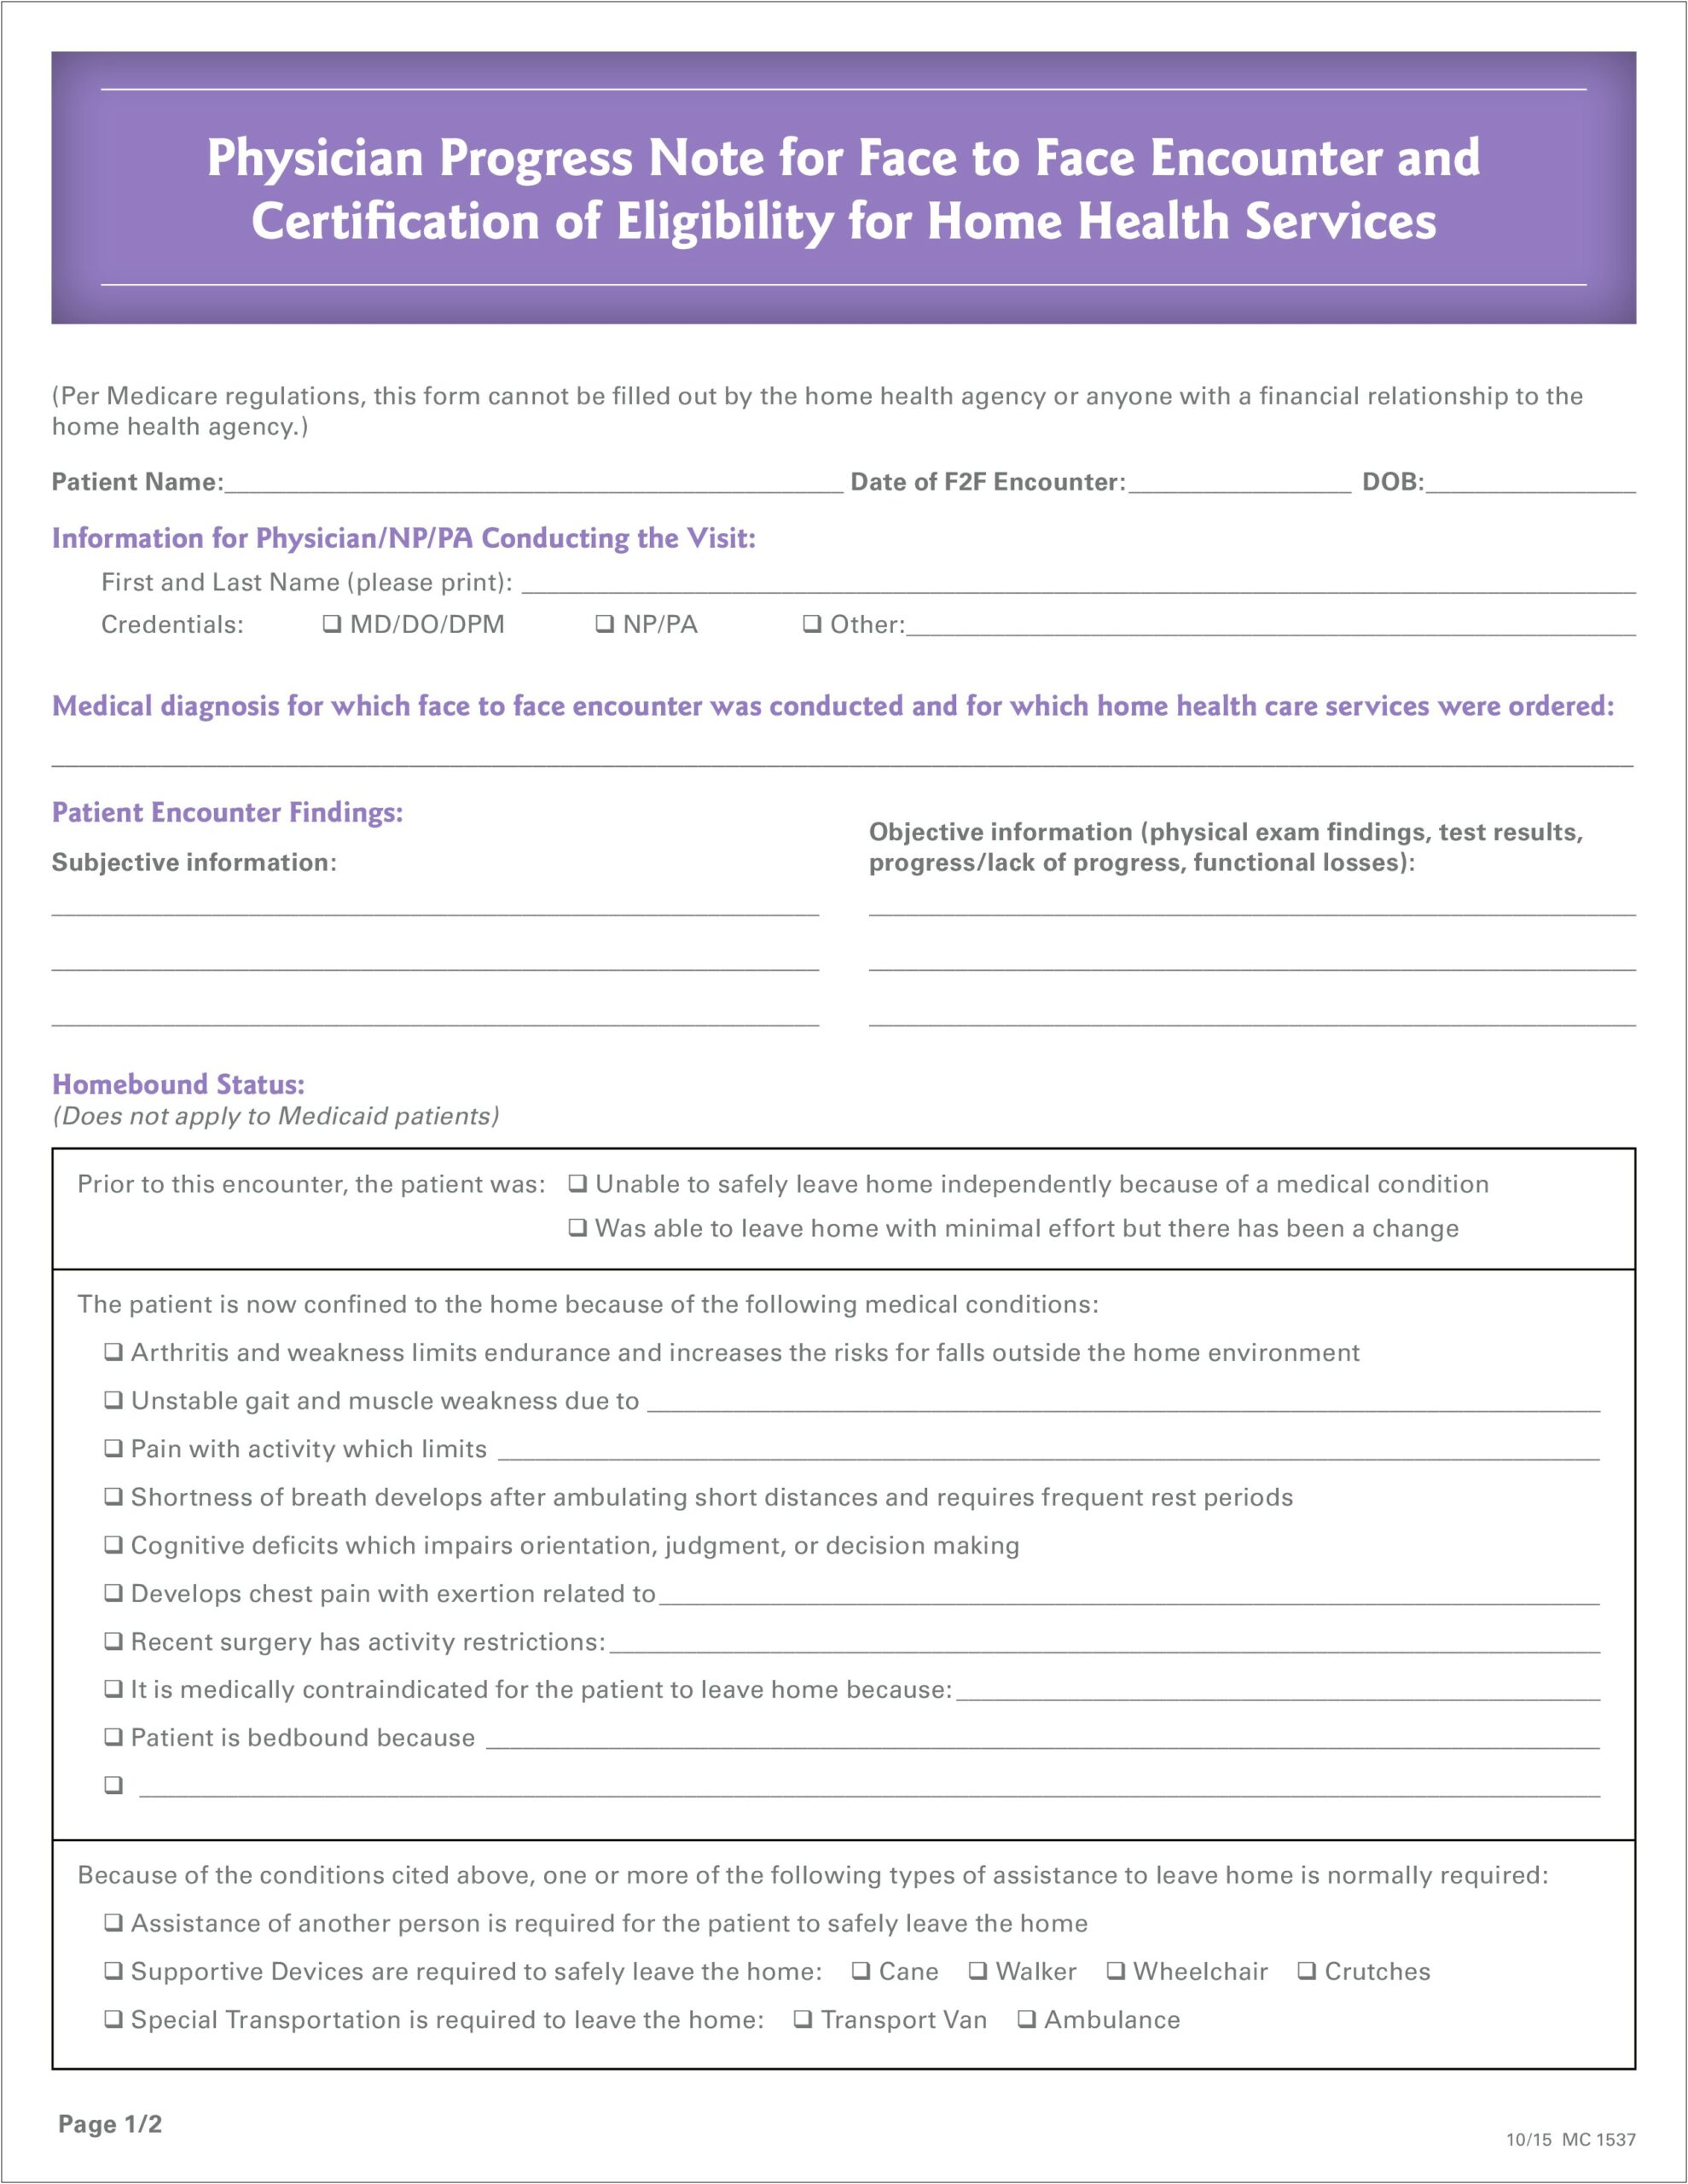 free-printable-book-review-report-template-templates-resume-designs